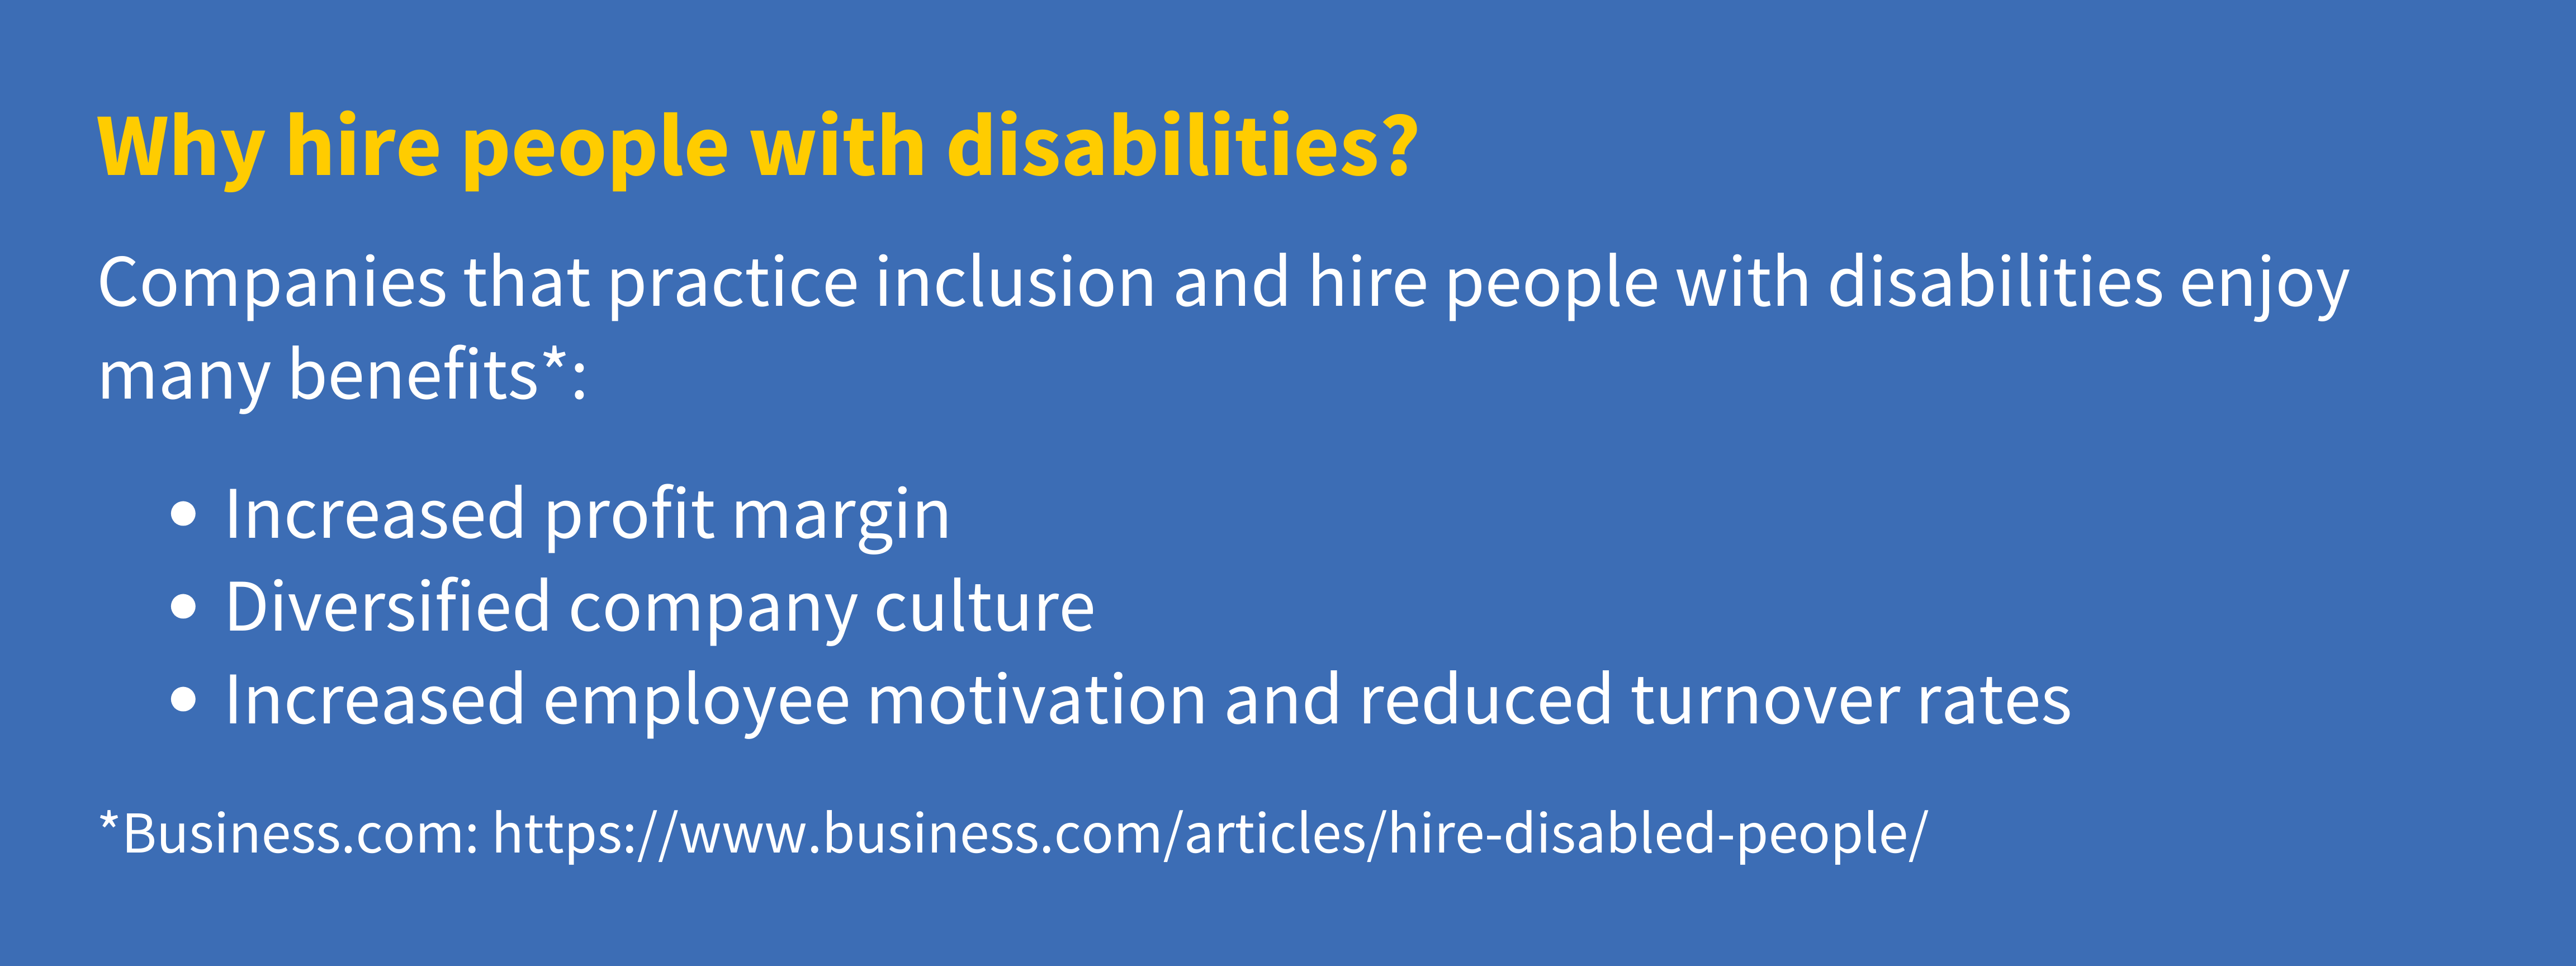 Companies that practice inclusion and hire people with disabilities enjoy many benefits, including: 1) Increased profit margin, 2) Diversified company culture, 3) Increased employee motivation and reduced turnover rates